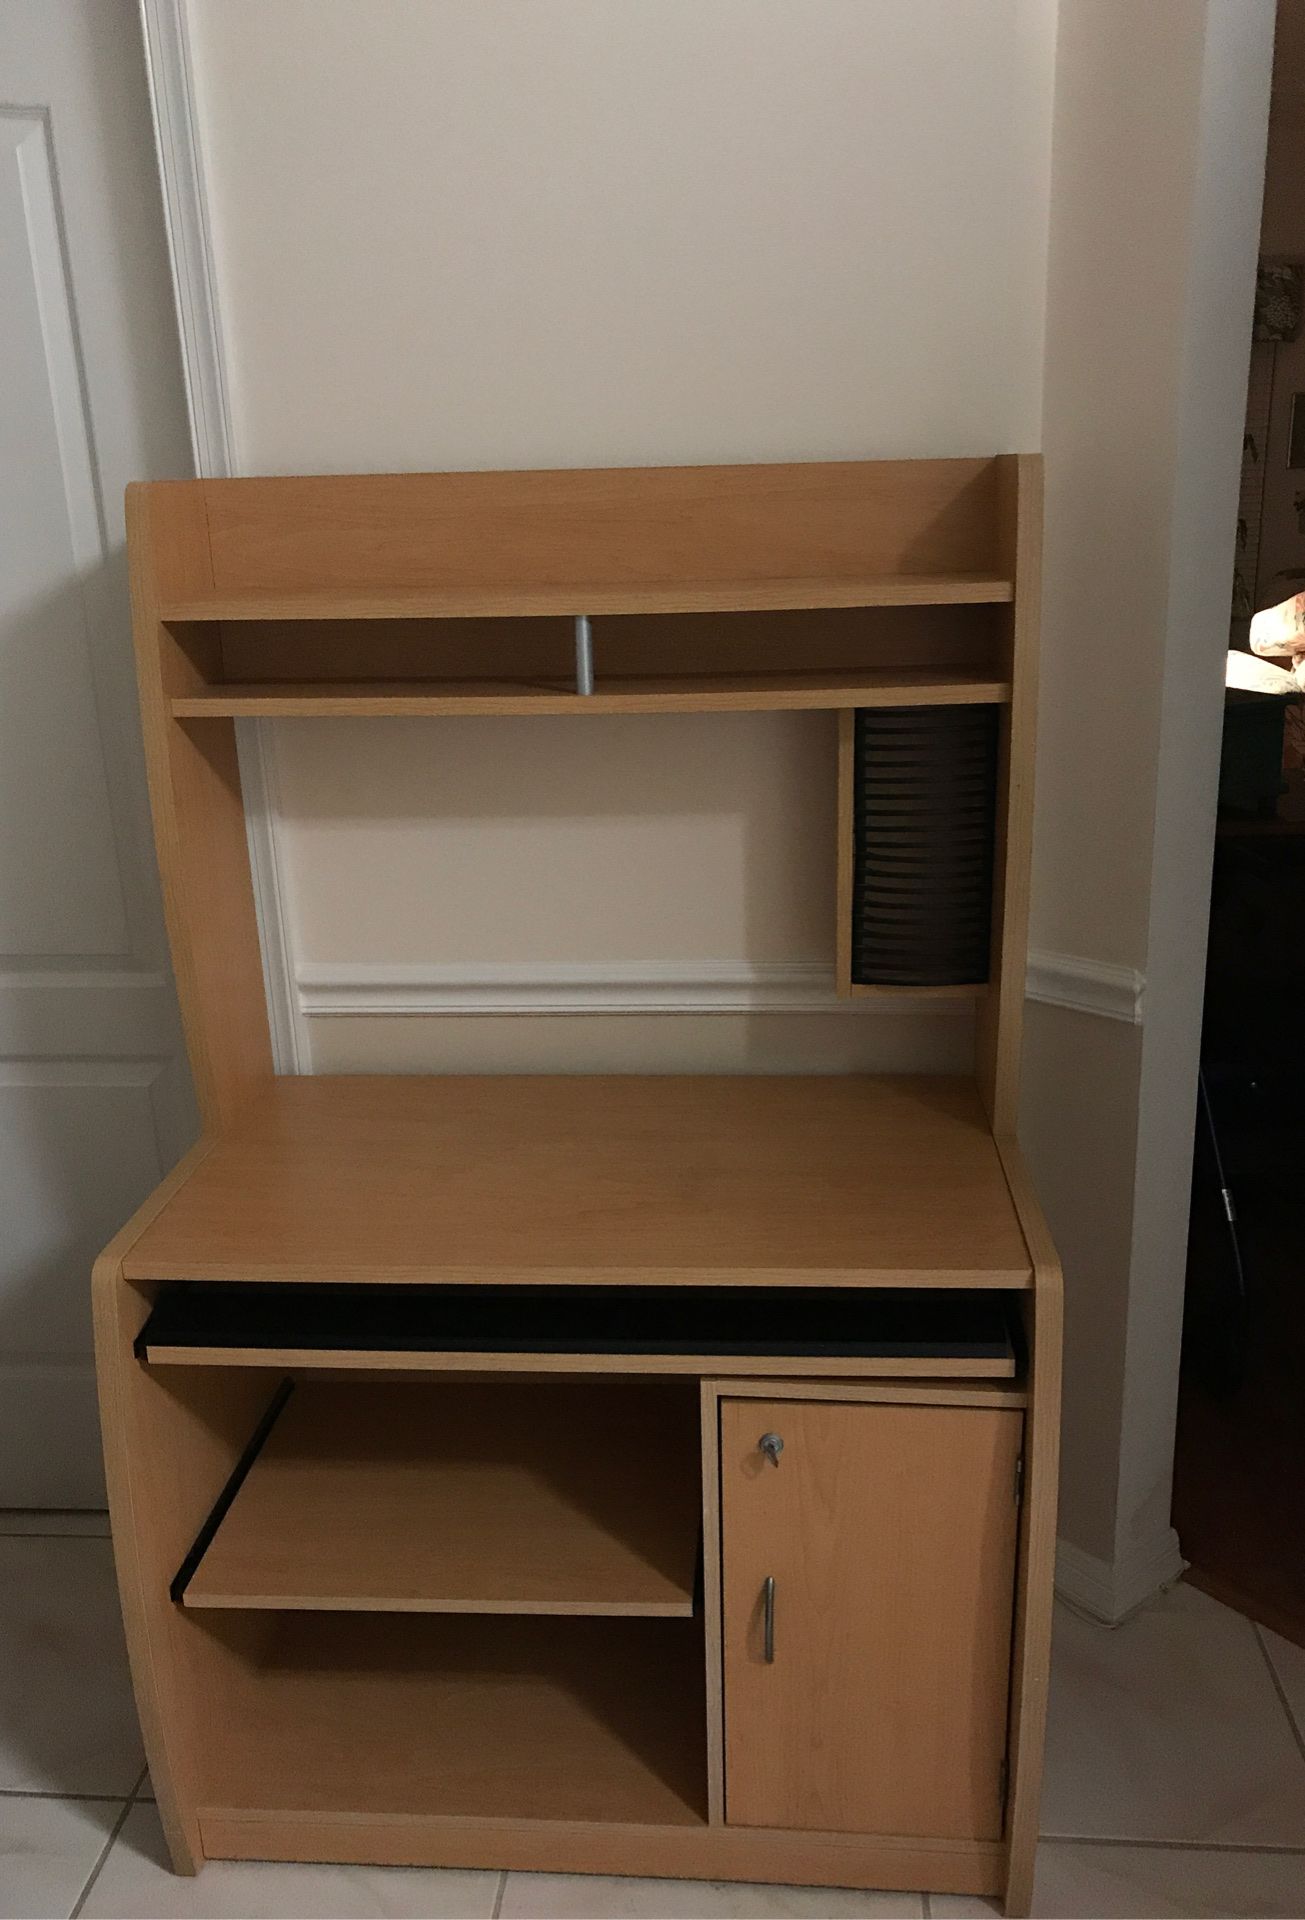 Computer cabinet with pull-out shelf for printer. Pull-out shelf for keyboard & other storage. CD & hard drive storage. On casters for easy moving.